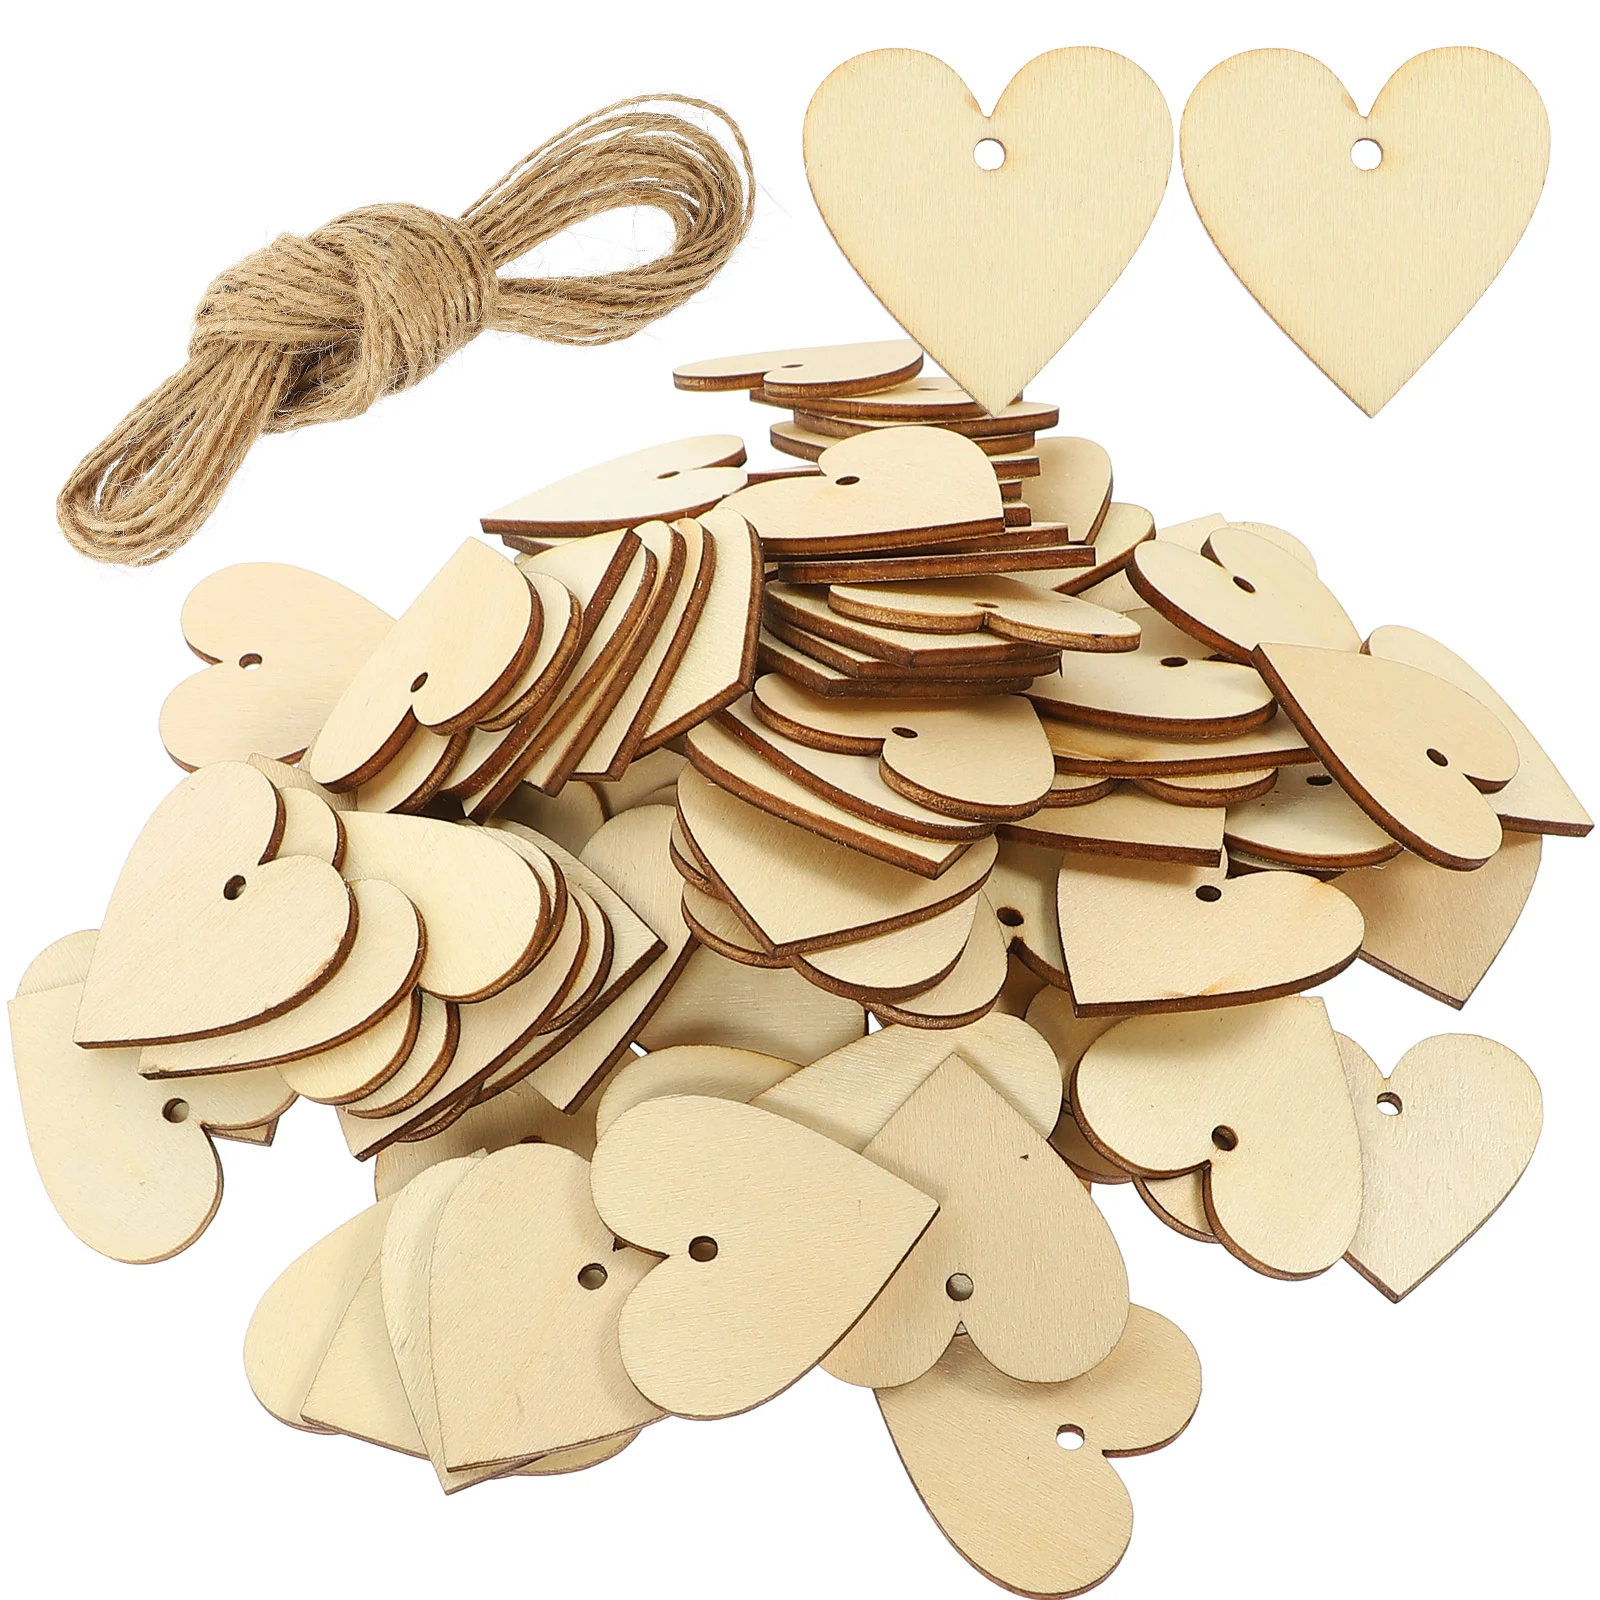 

Wood Heart Wooden Pieces Slices Hearts Unfinished Shaped Blank Ornaments Tags Decor Asthetically Bedroom Tag Crafts Diy Cutouts